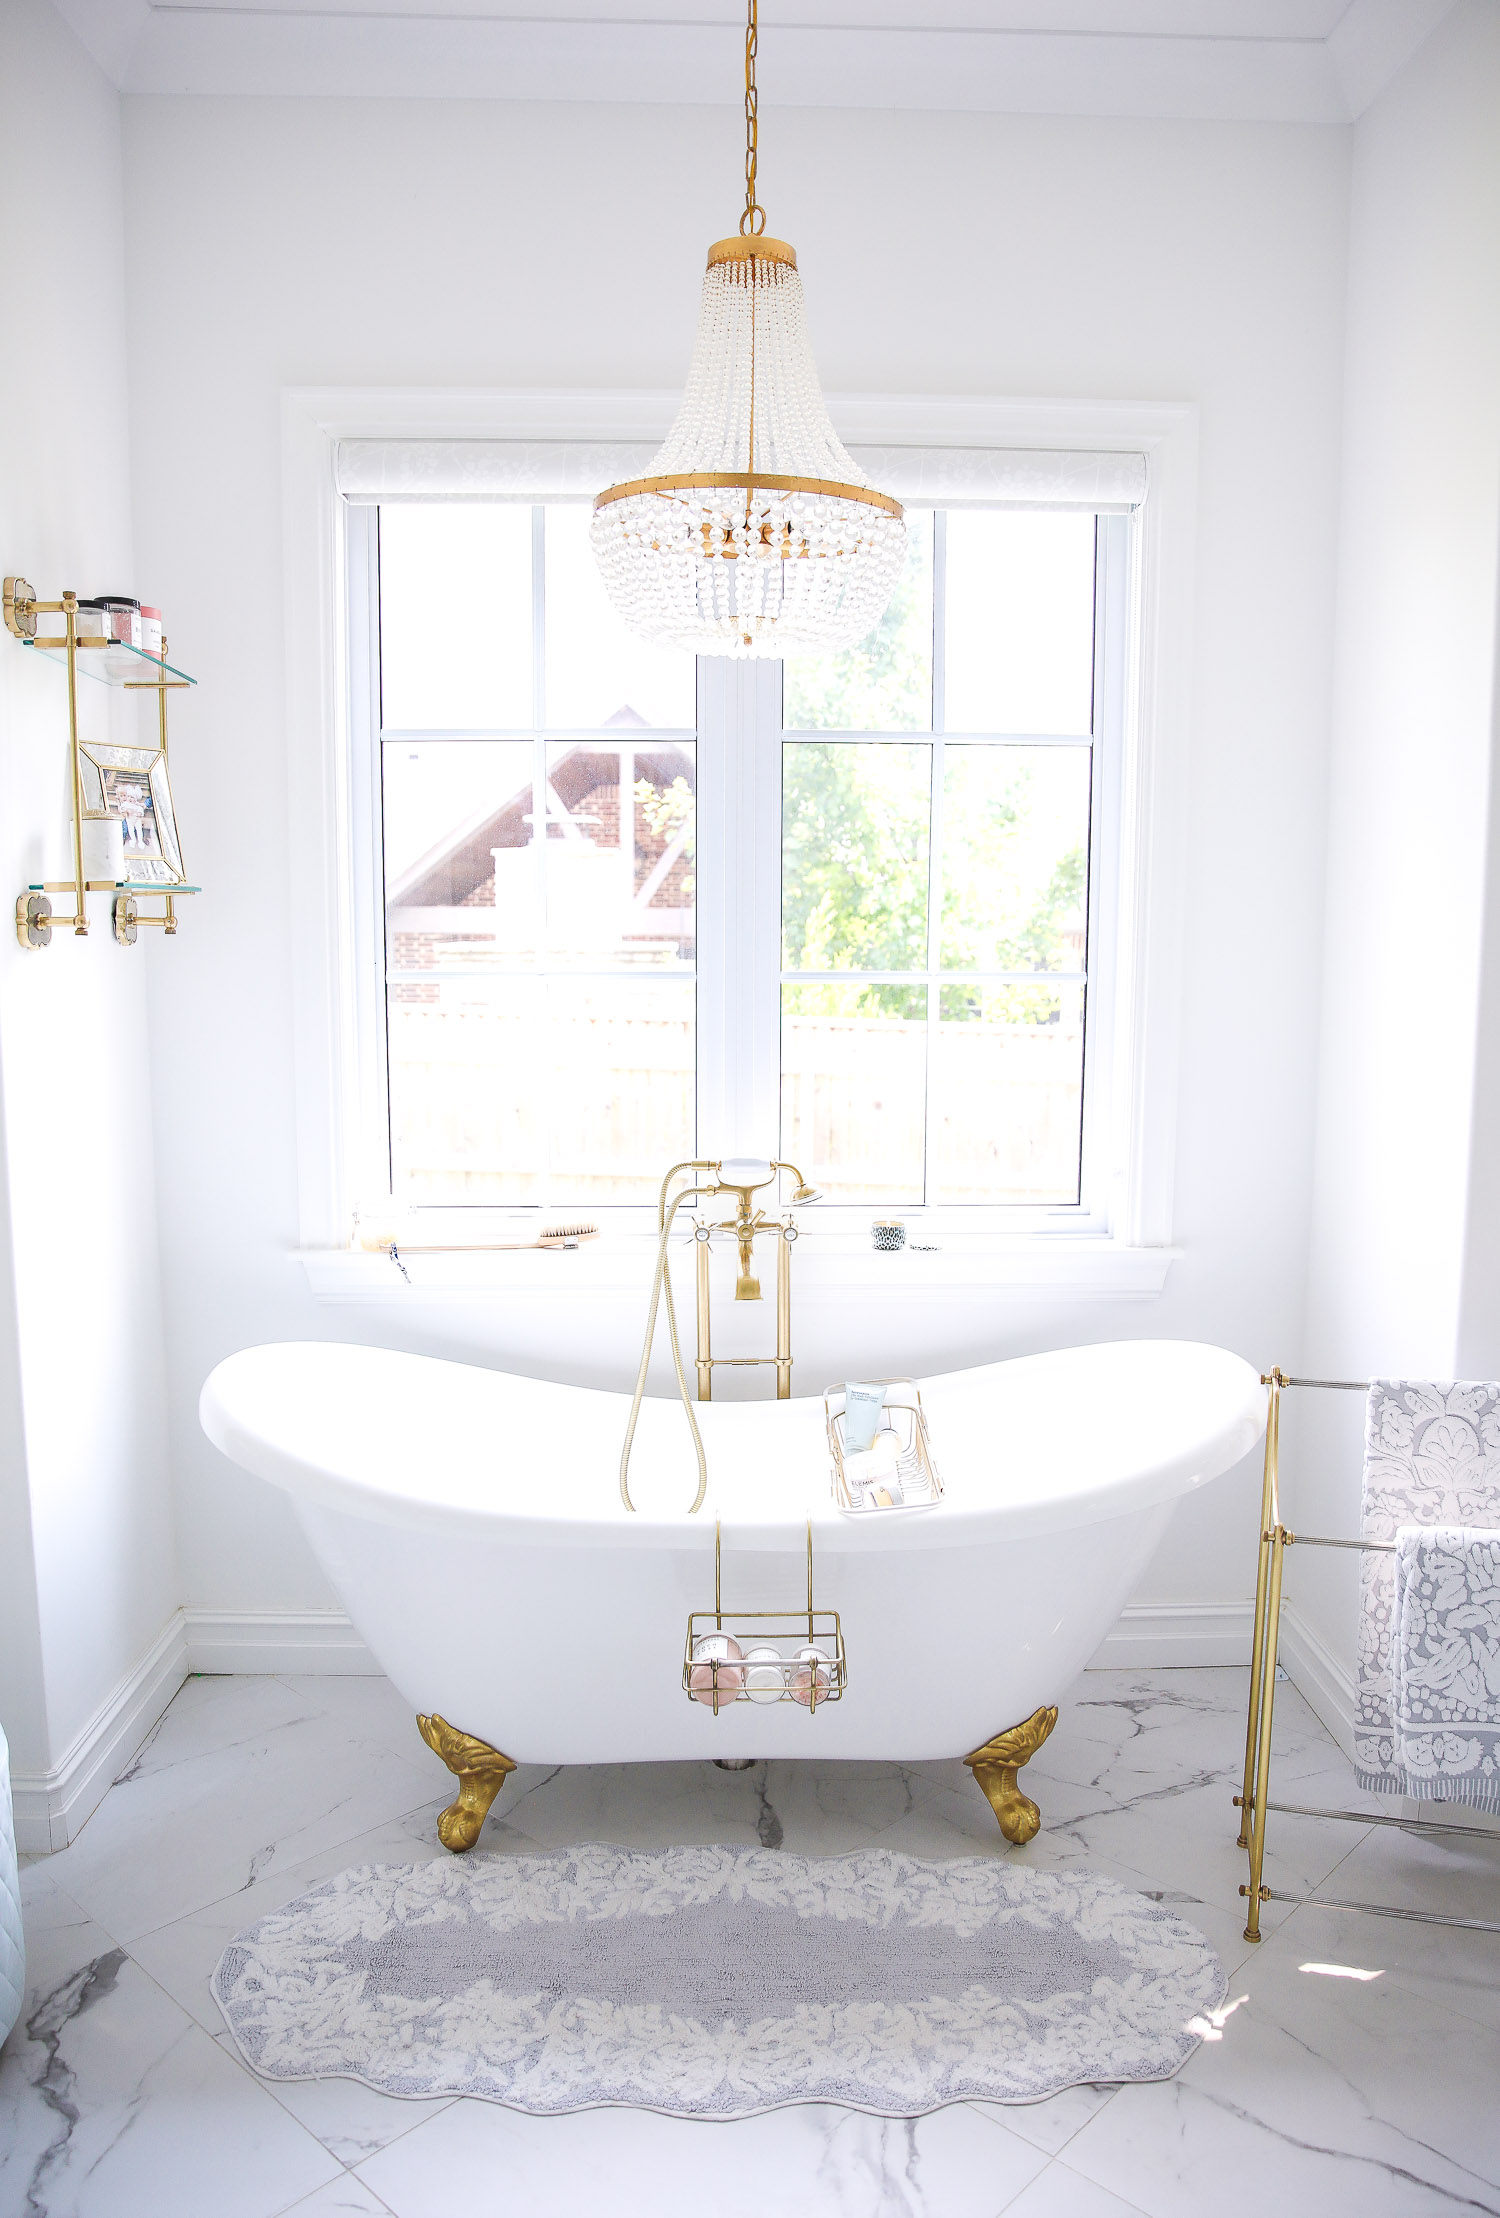 Emily gemma master bathroom, Nordstrom anniversary sale 2021 beauty must haves, anthropologie bathrom decor 2021, pinterest bathroom all white gold | Instagram Recap by popular US life and style blog, The Sweetest Thing: image of a white and gold clawfoot tub with a gold and crystal chandelier and gold towel rack. 